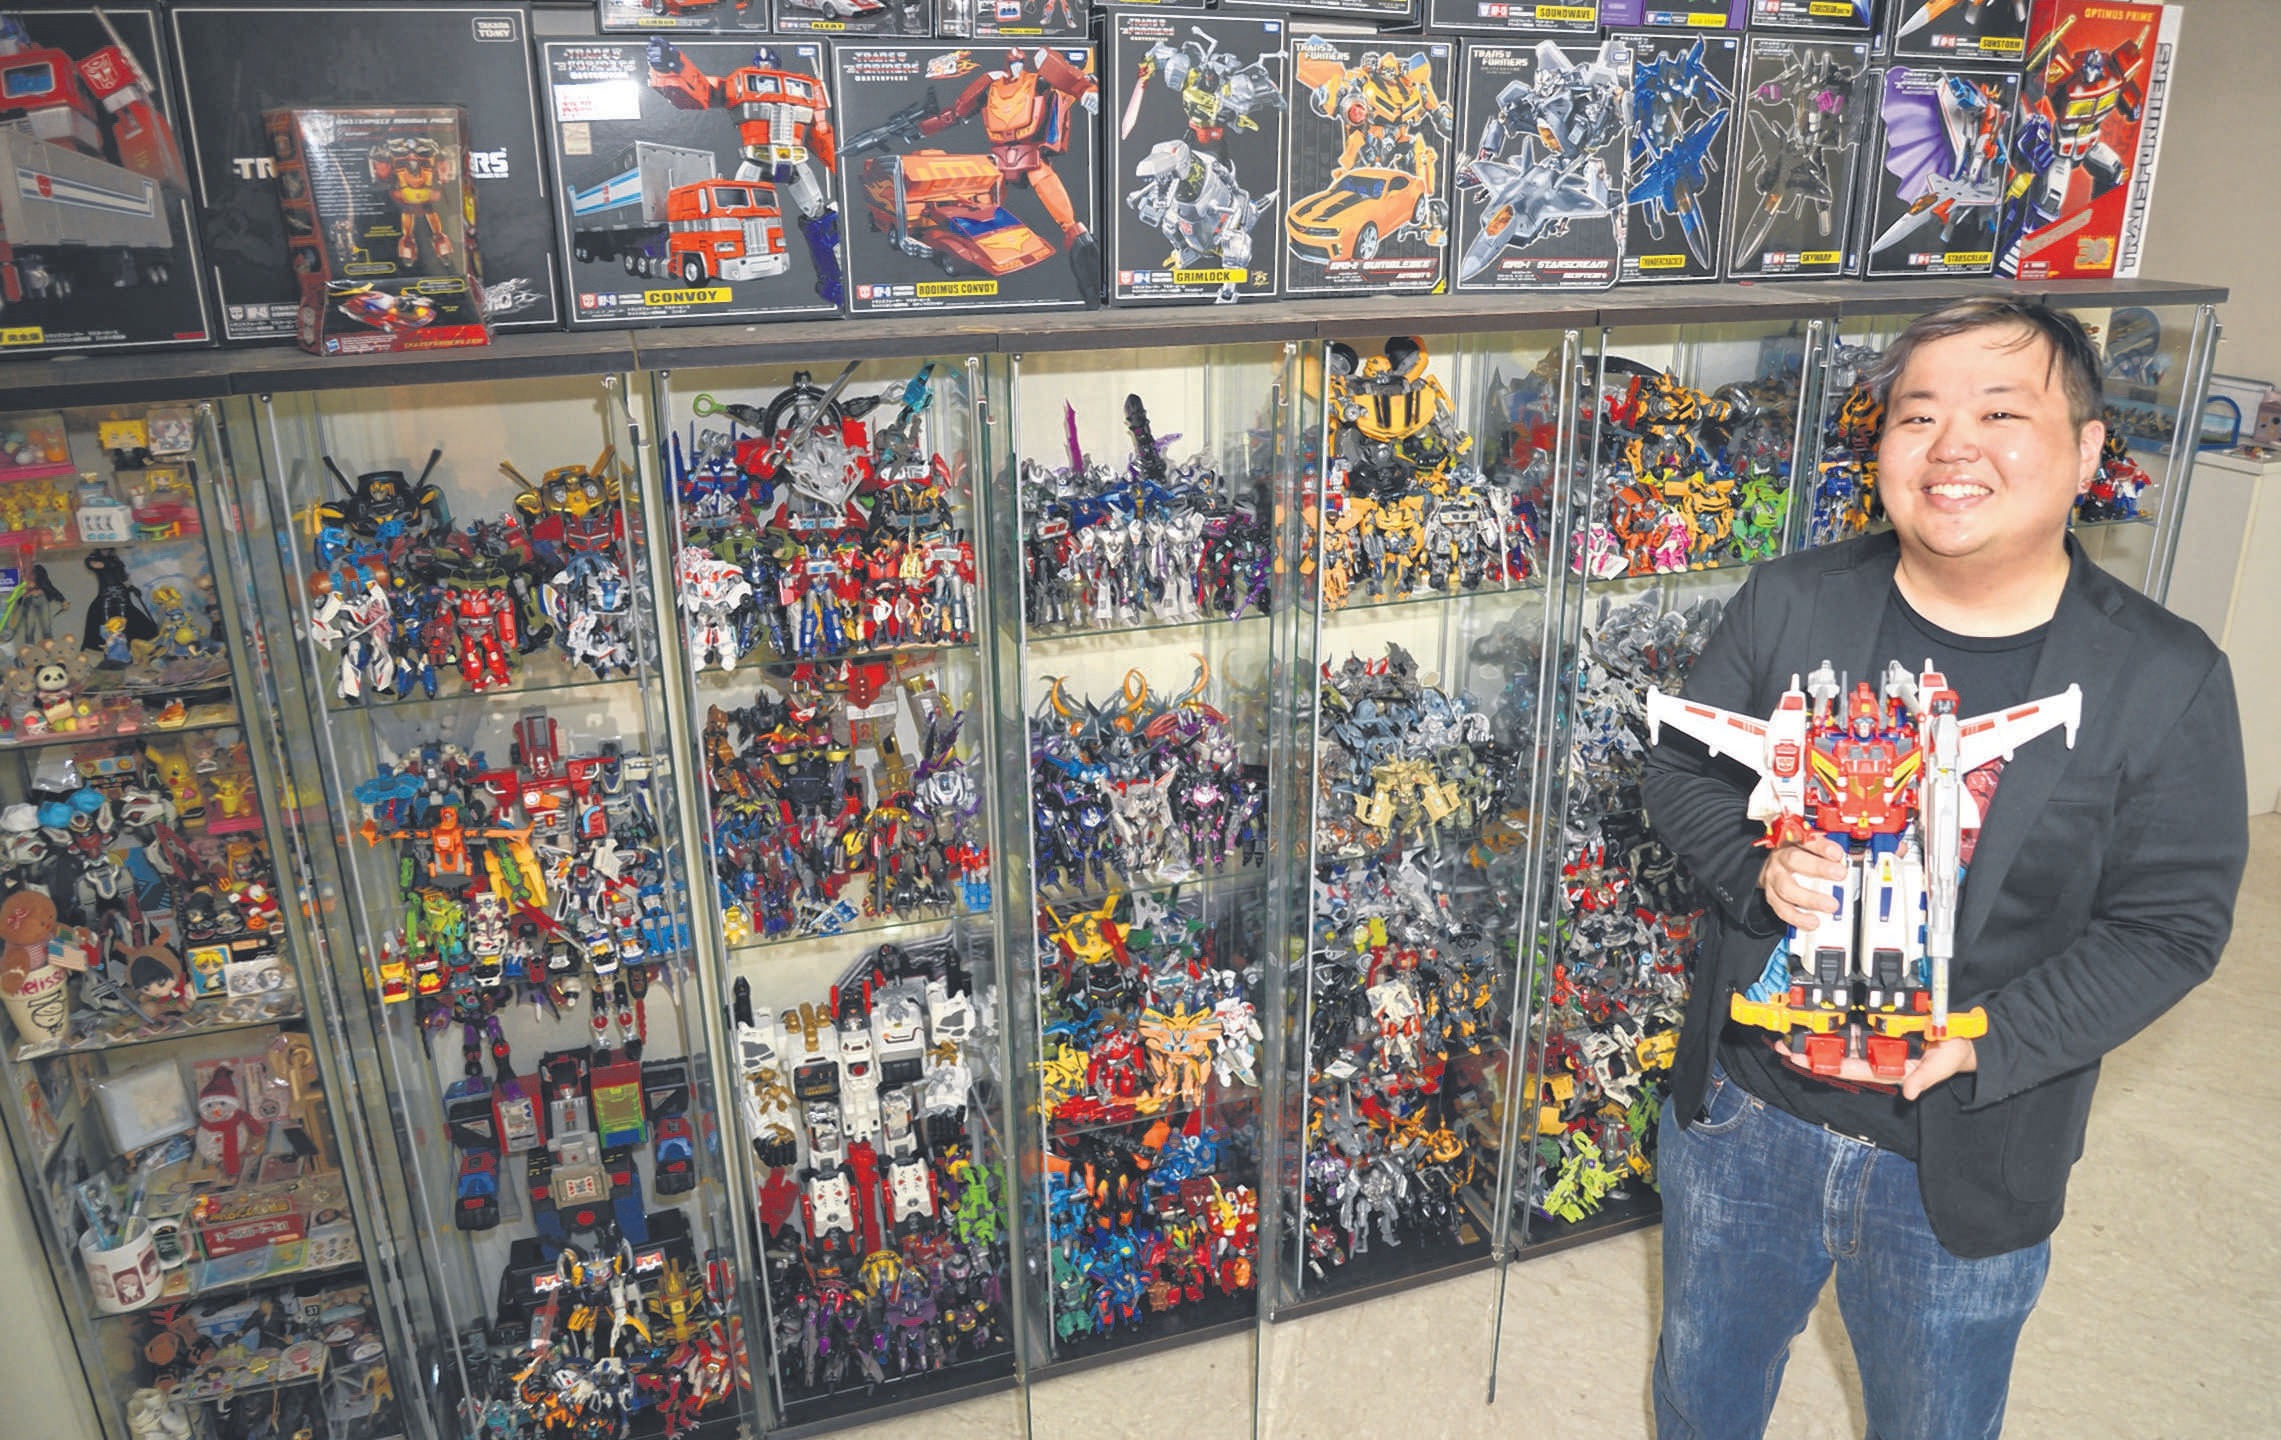 RETIREE GOH HENG SIANG on his son Marcus Goh (left), 32, who has more than 1,600 Transformers figurines